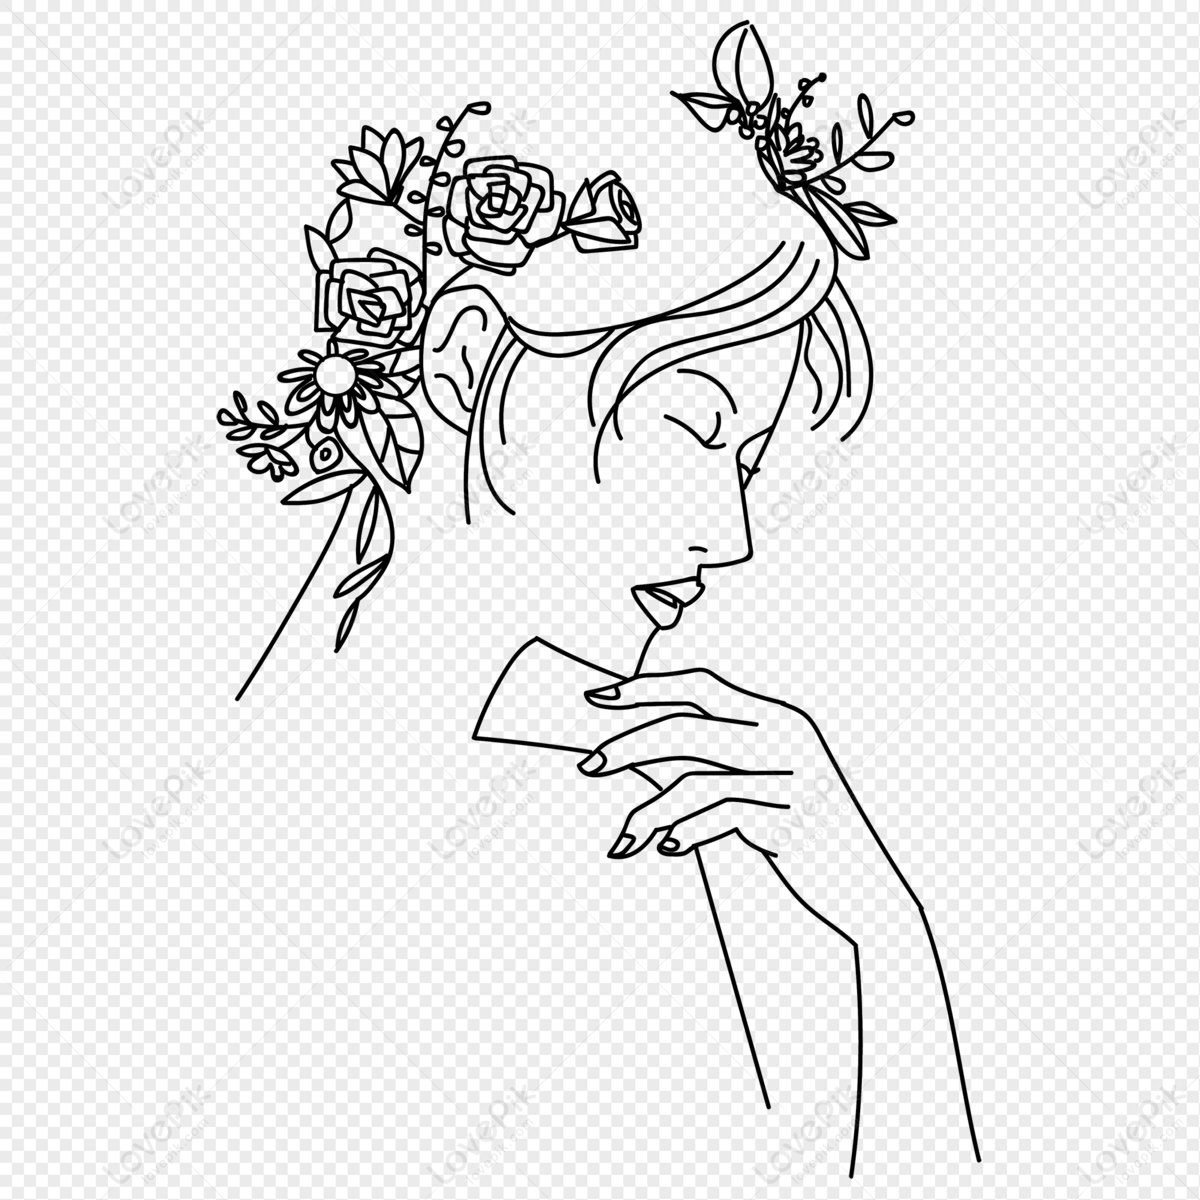 line drawing vectors free illustrations drawings png clip art backgrounds images - rawpixel on woman line drawing png